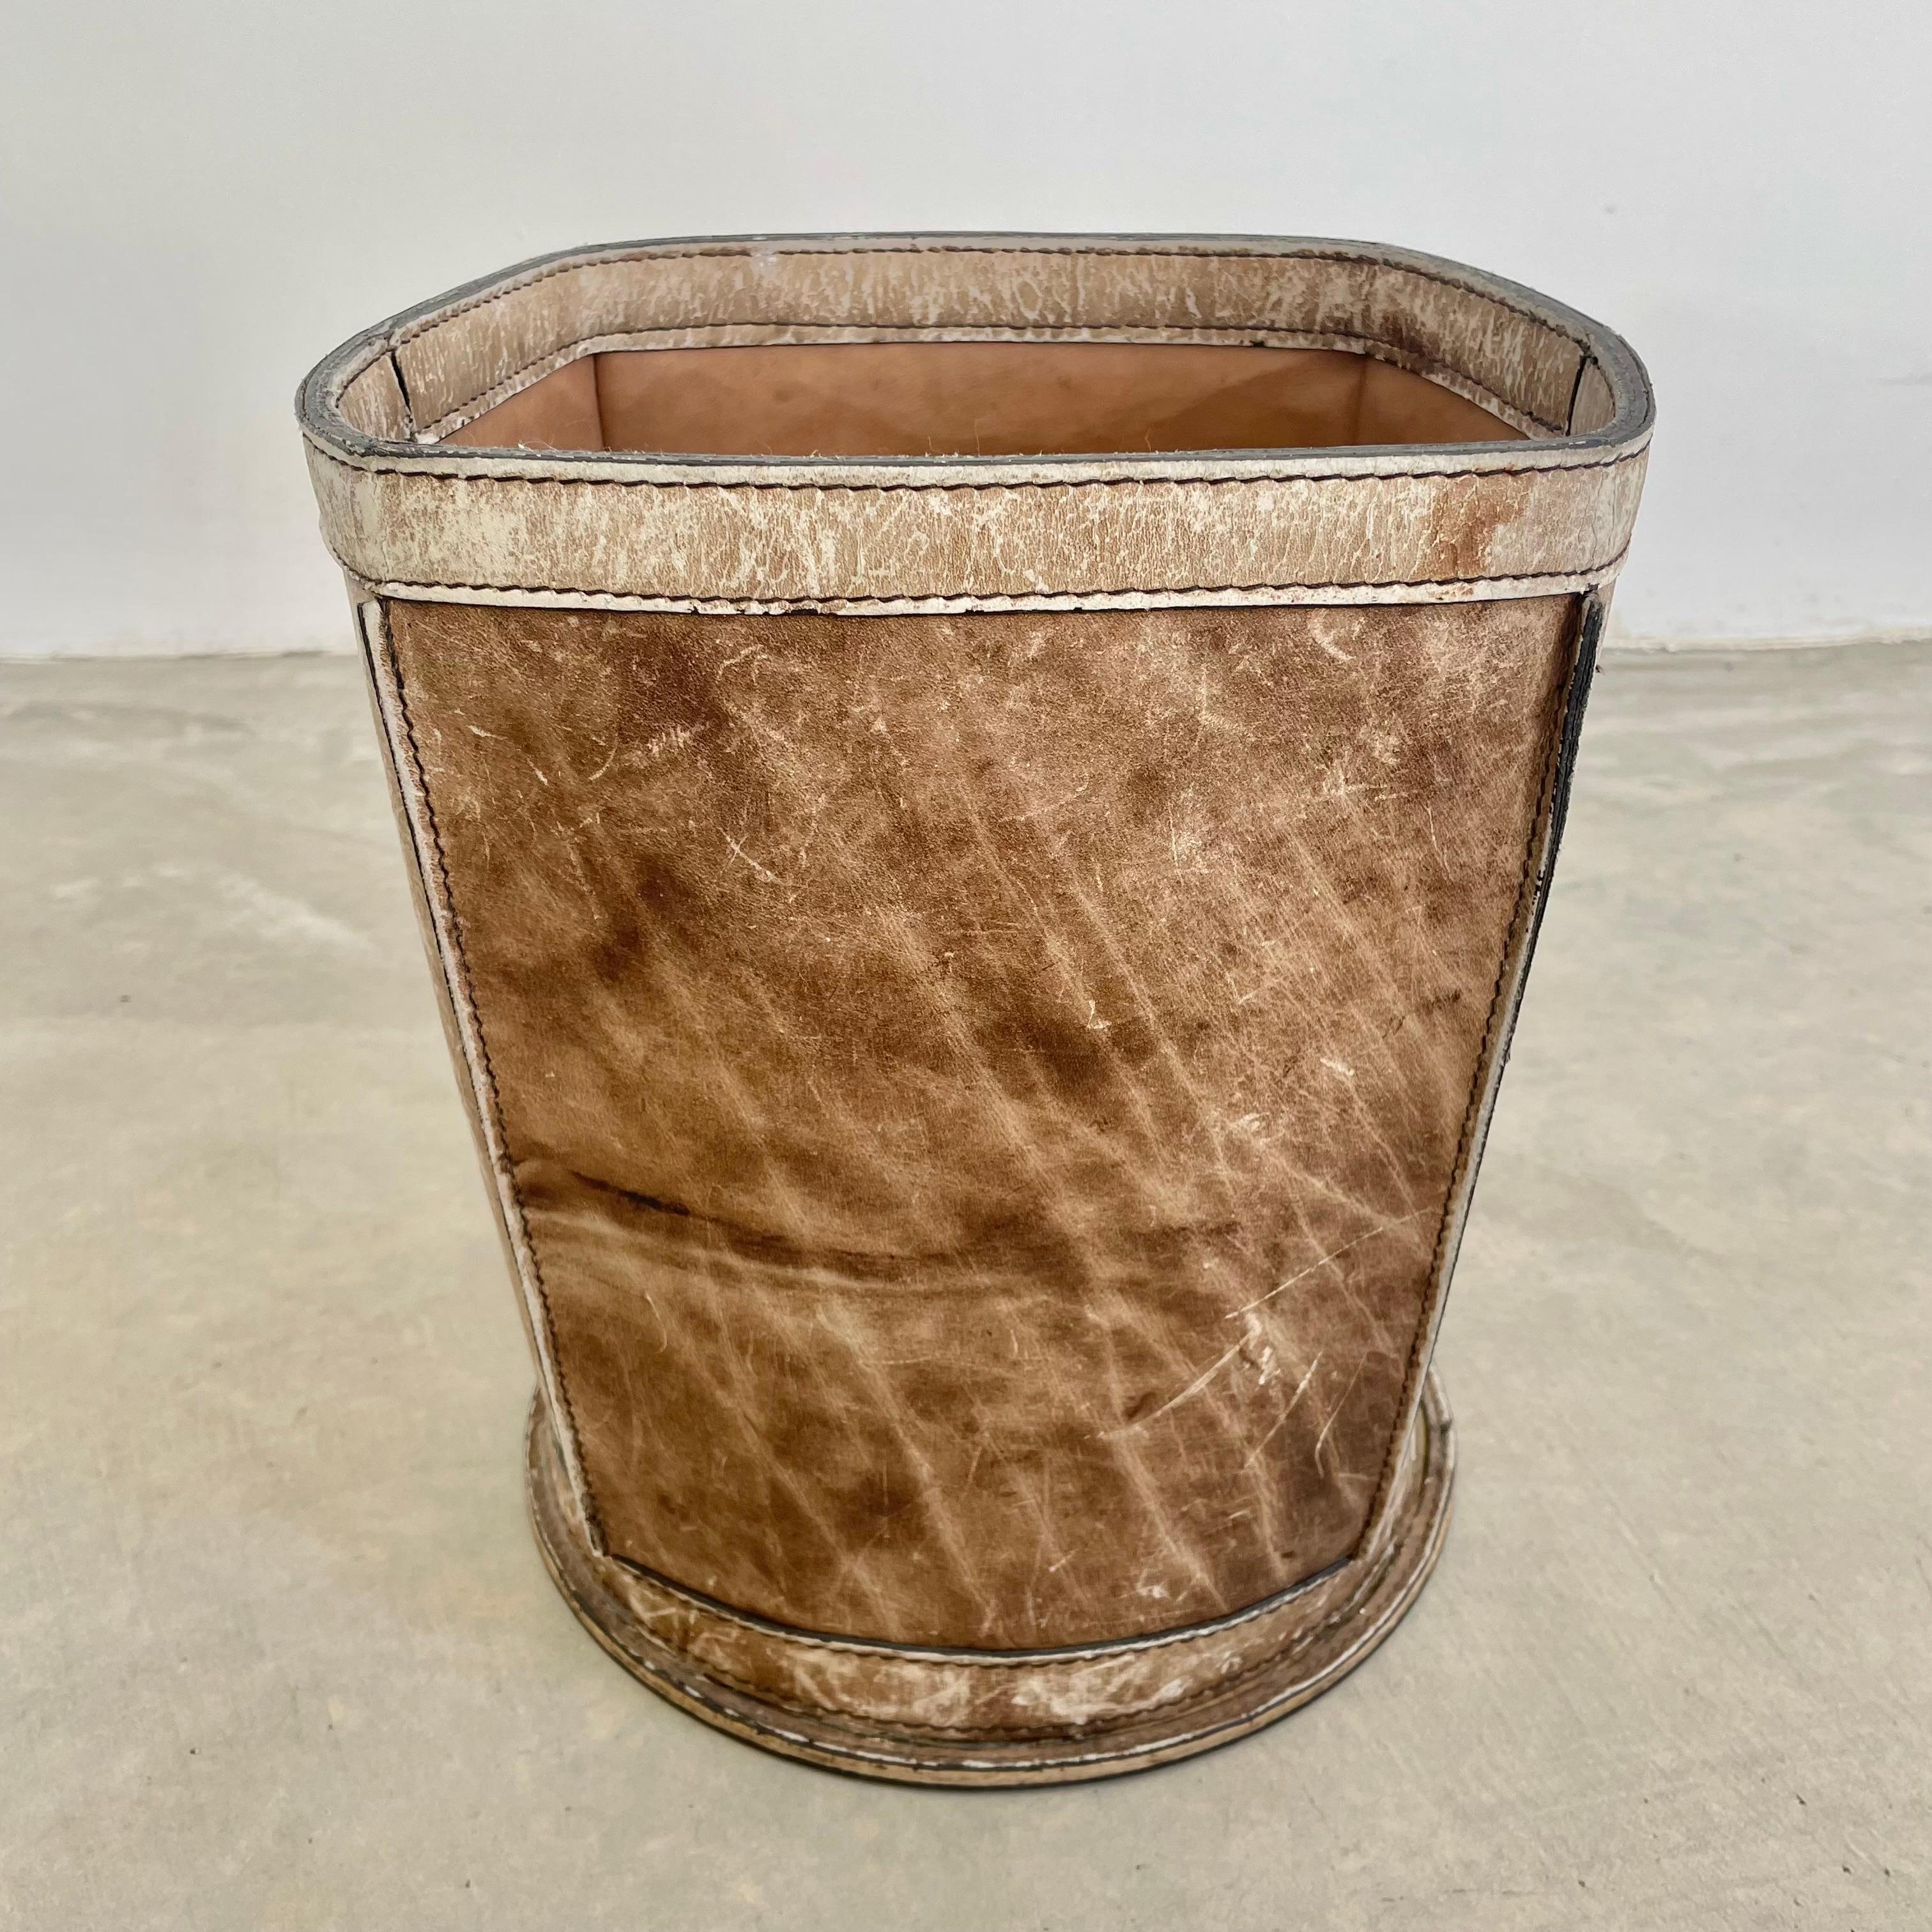 Beautiful distressed leather waste bin. Fully made of a thick cowhide leather with the upper stitched in a square shape and fastened onto a circular base giving it great lines. Great army brown color with deep brown undertones. High quality leather